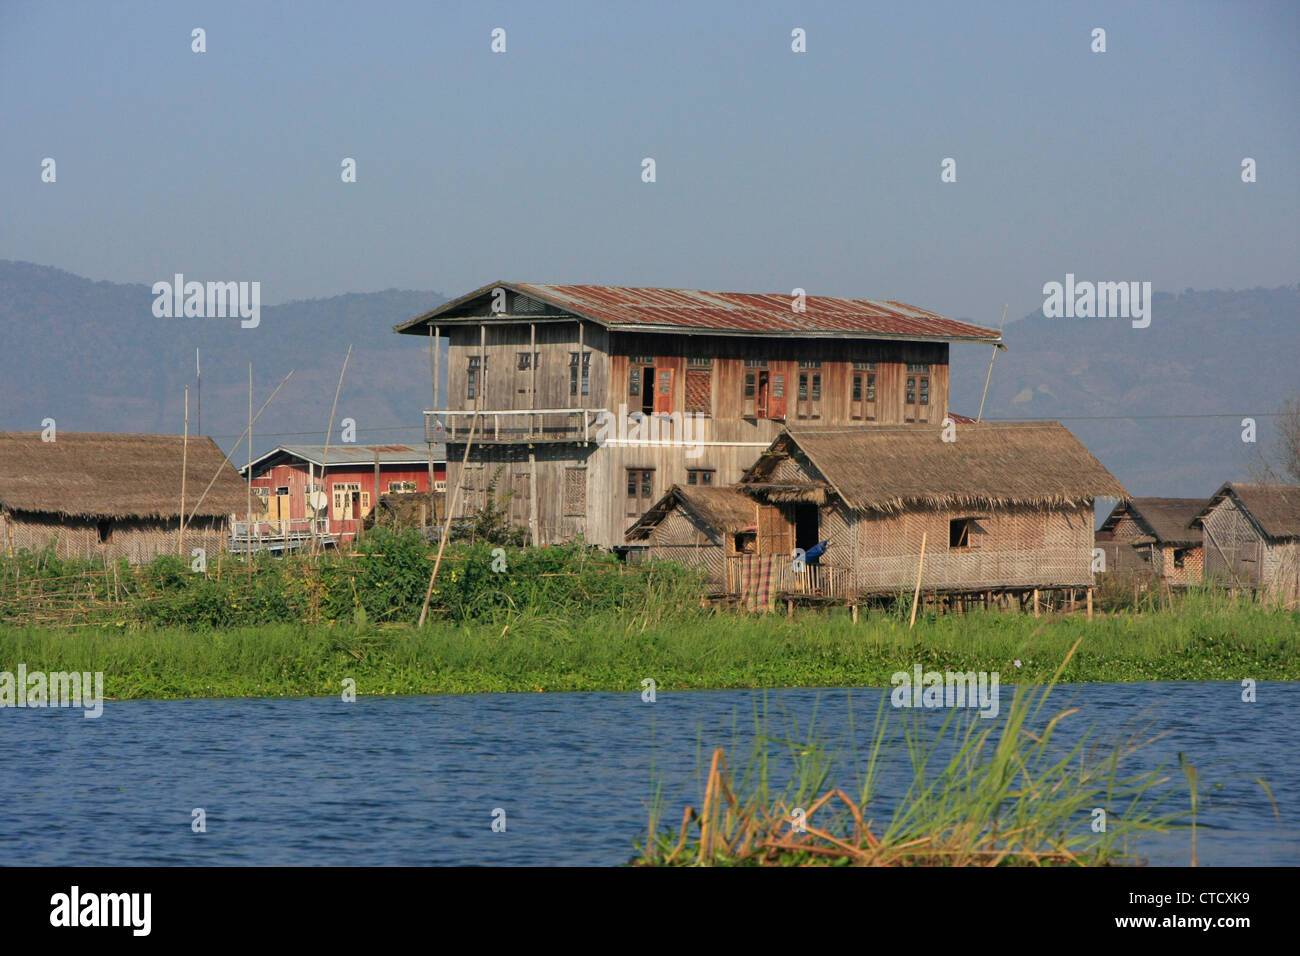 Traditional wooden stilt houses, Inle lake, Shan state, Myanmar, Southeast Asia Stock Photo